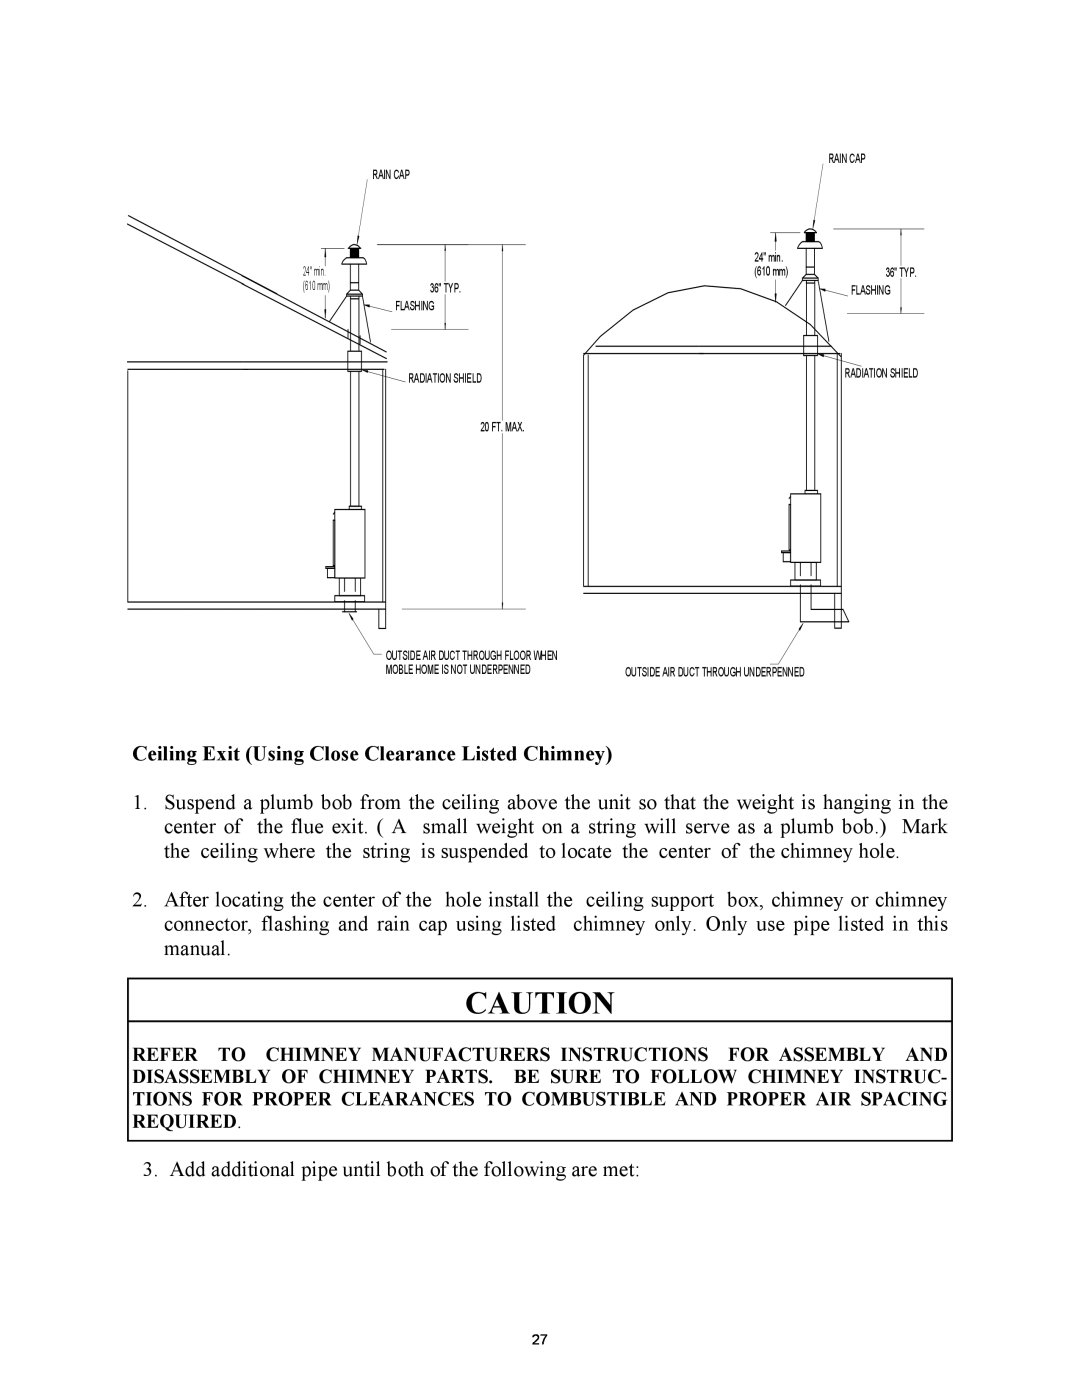 New Buck Corporation 85 installation instructions Ceiling Exit Using Close Clearance Listed Chimney 